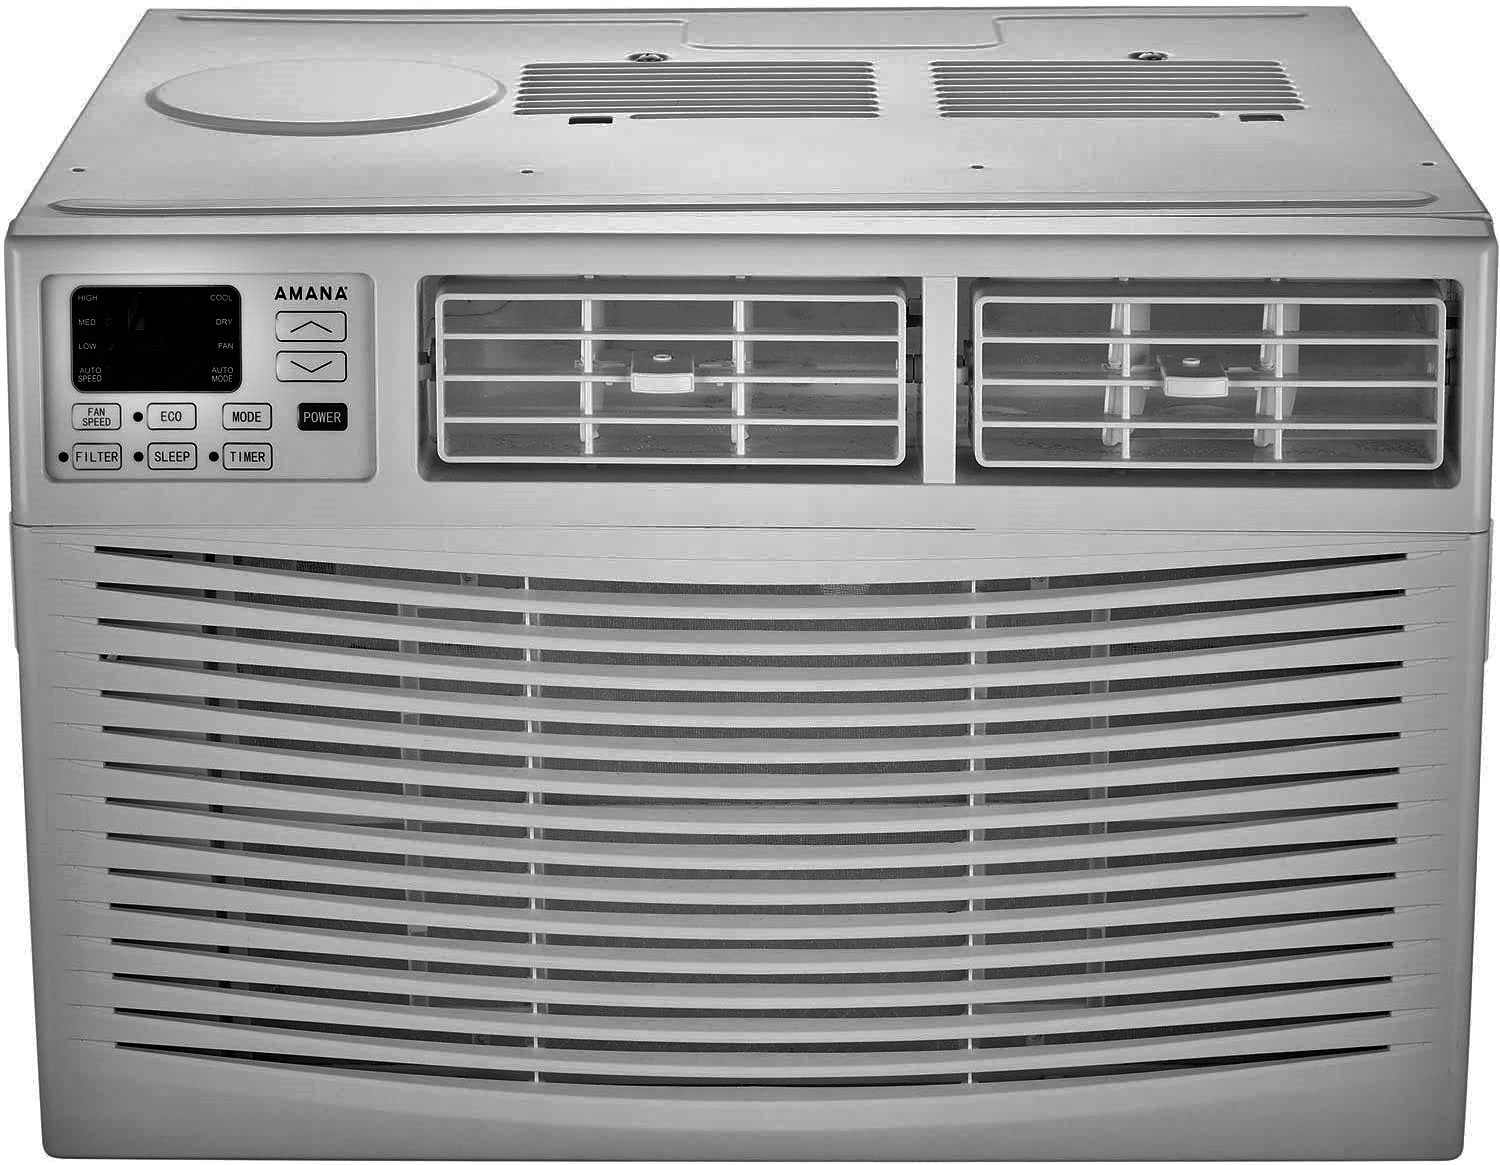 10 BEST AIR CONDITIONERS FOR YOUR GARAGE 2021 REVIEW